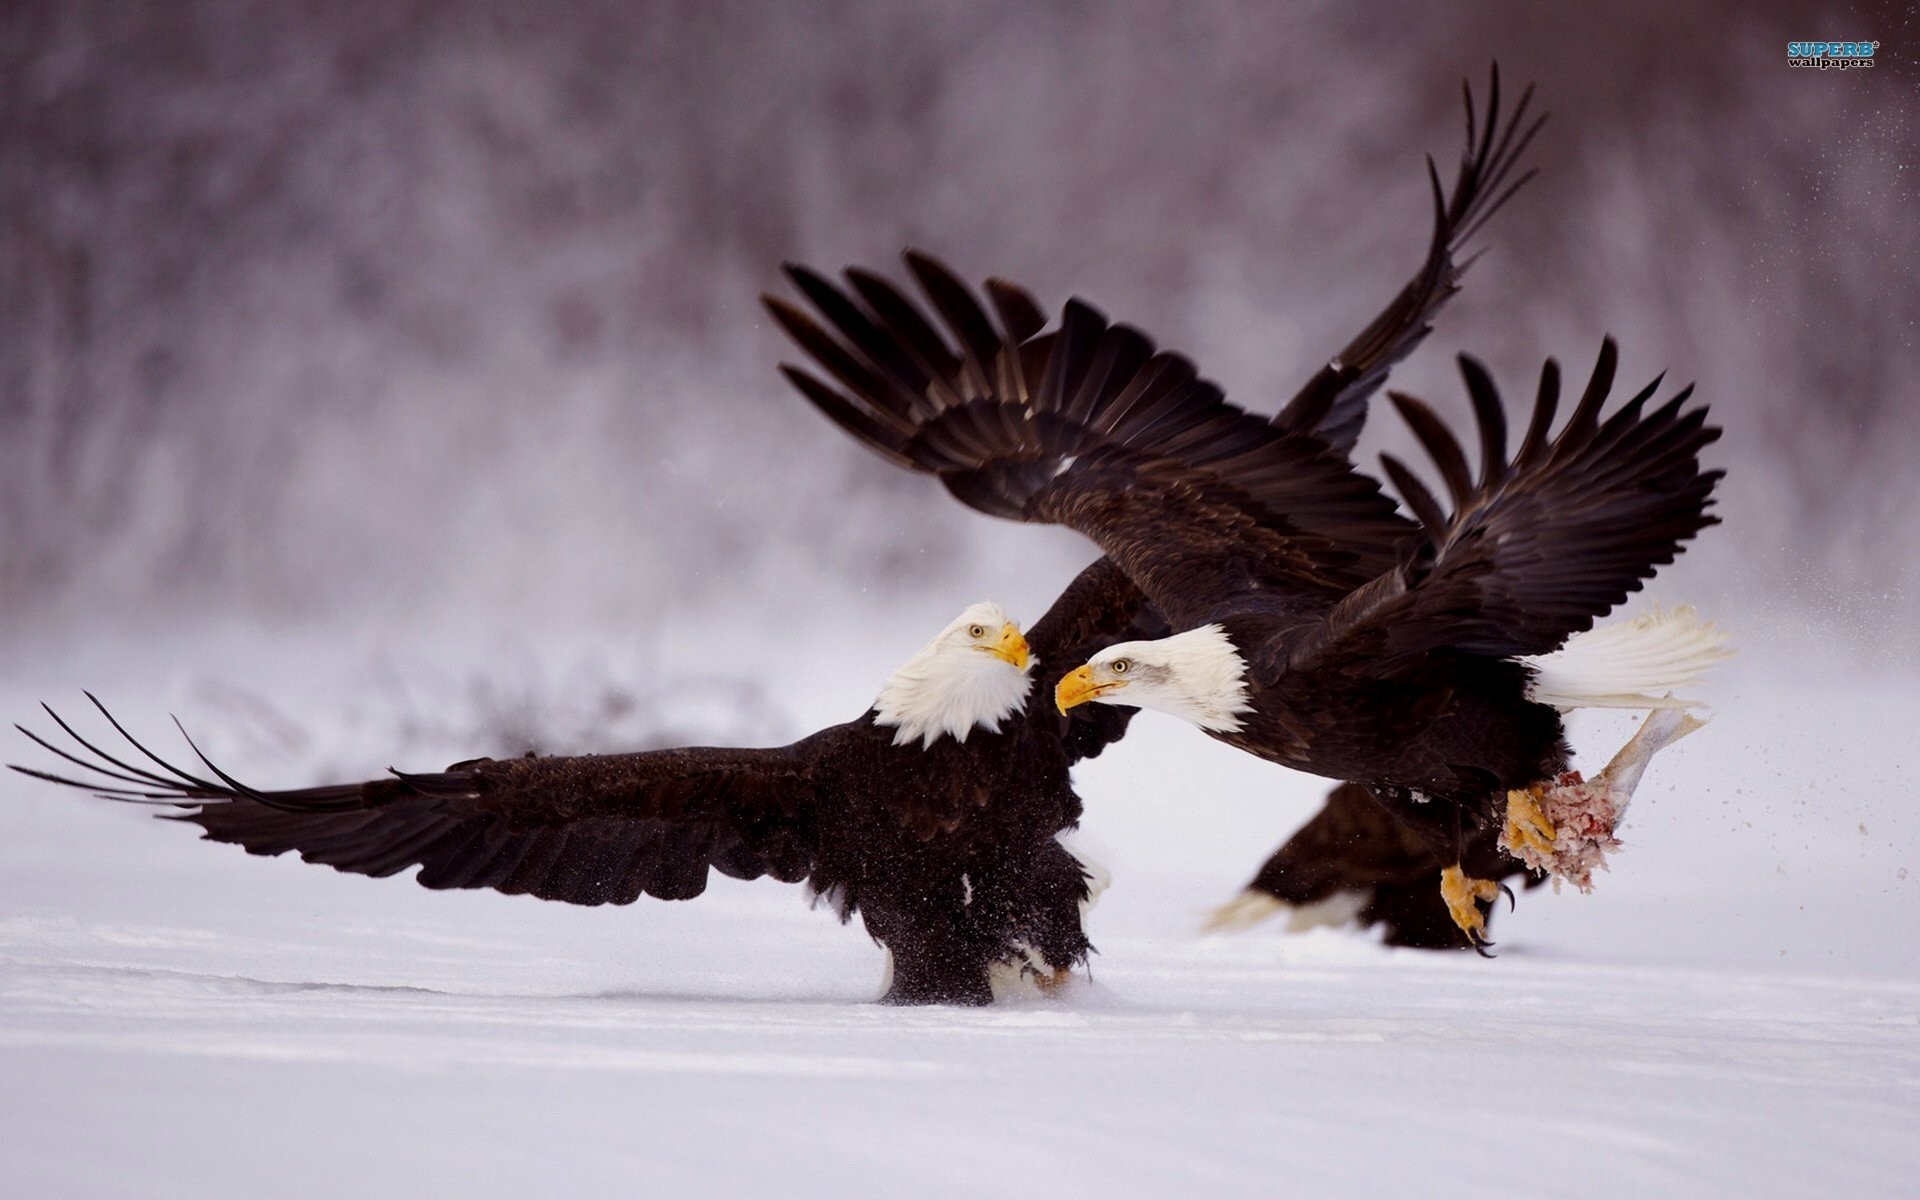 1920x1200 Posted by gags at 3:35 am Tagged with: America, Bald Eagles, Eagles,  Patriotism, Snow, Tag, Wallpaper Of The Day